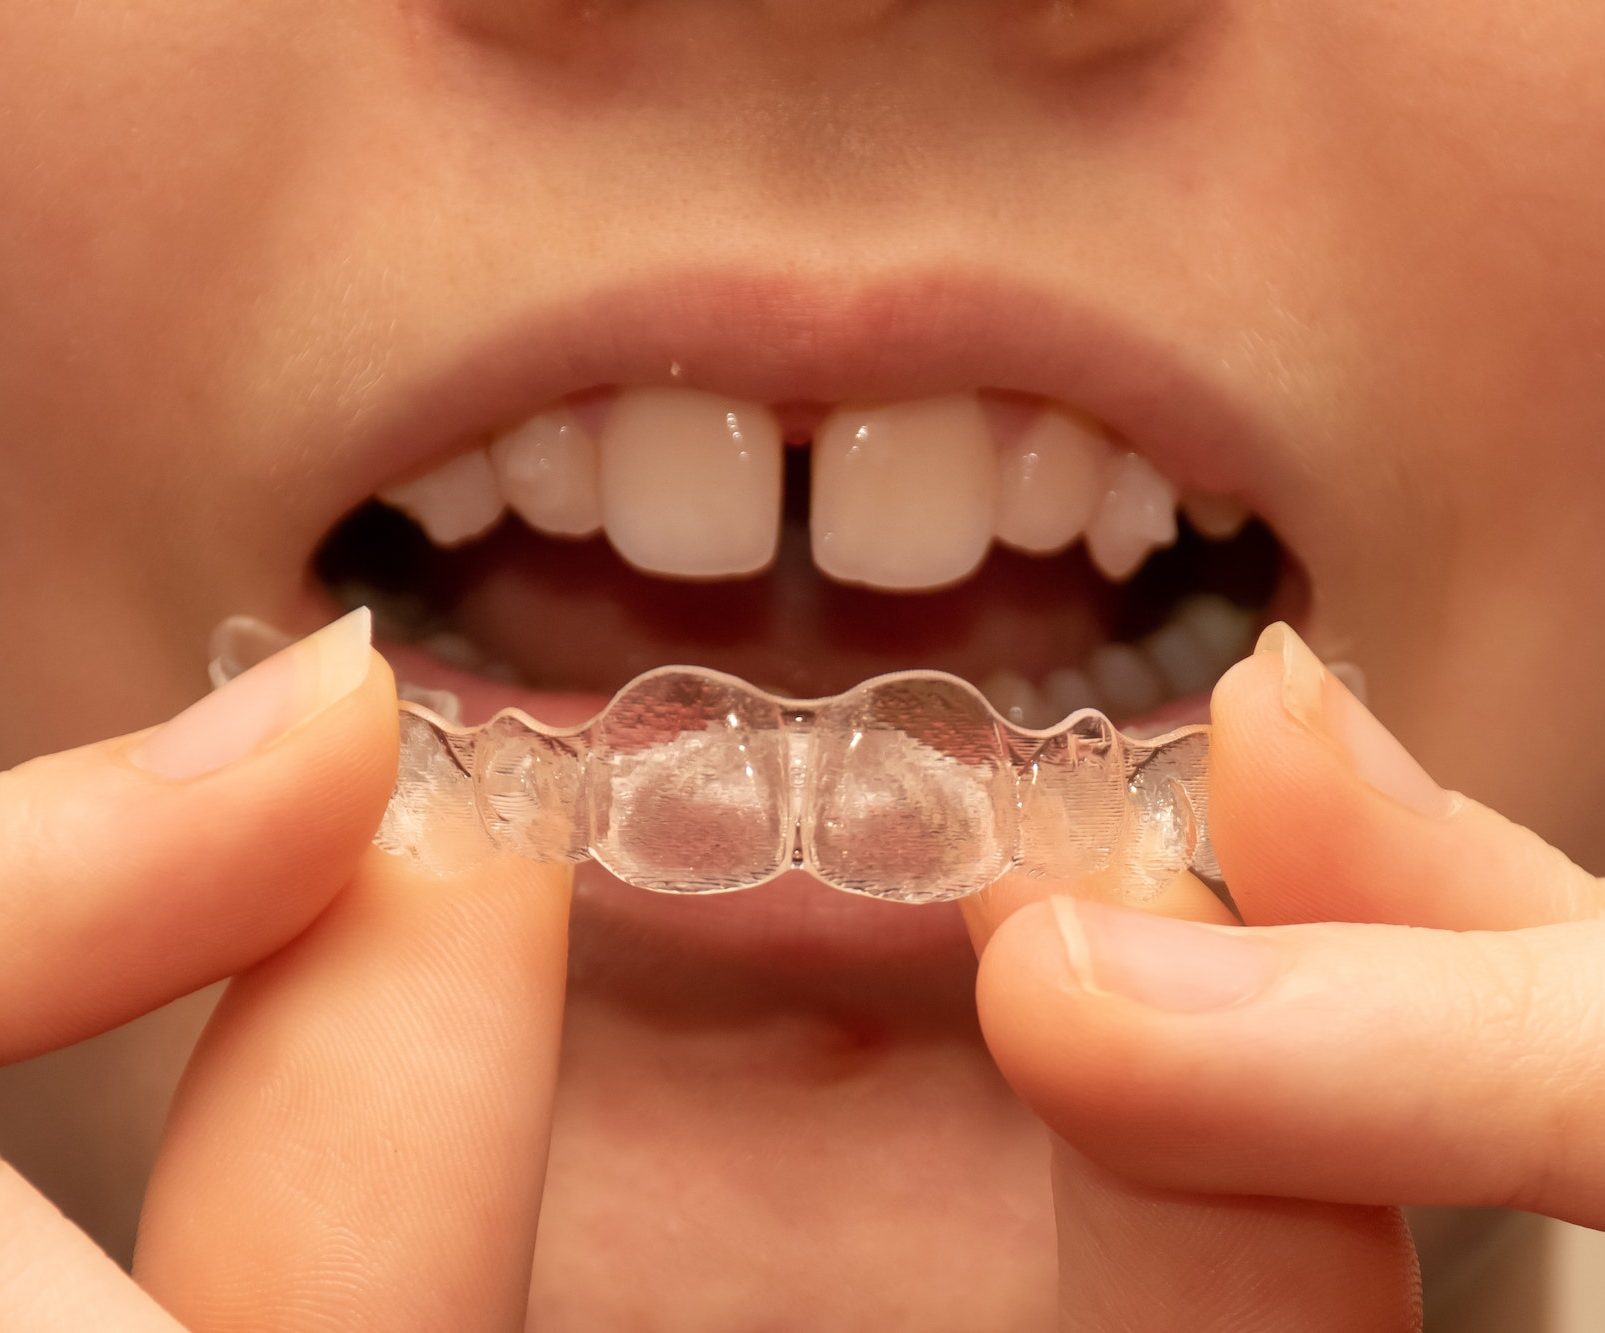 Girl put on Invisalign invisible braces. Bonded attachments on the teeth. Gap teeth